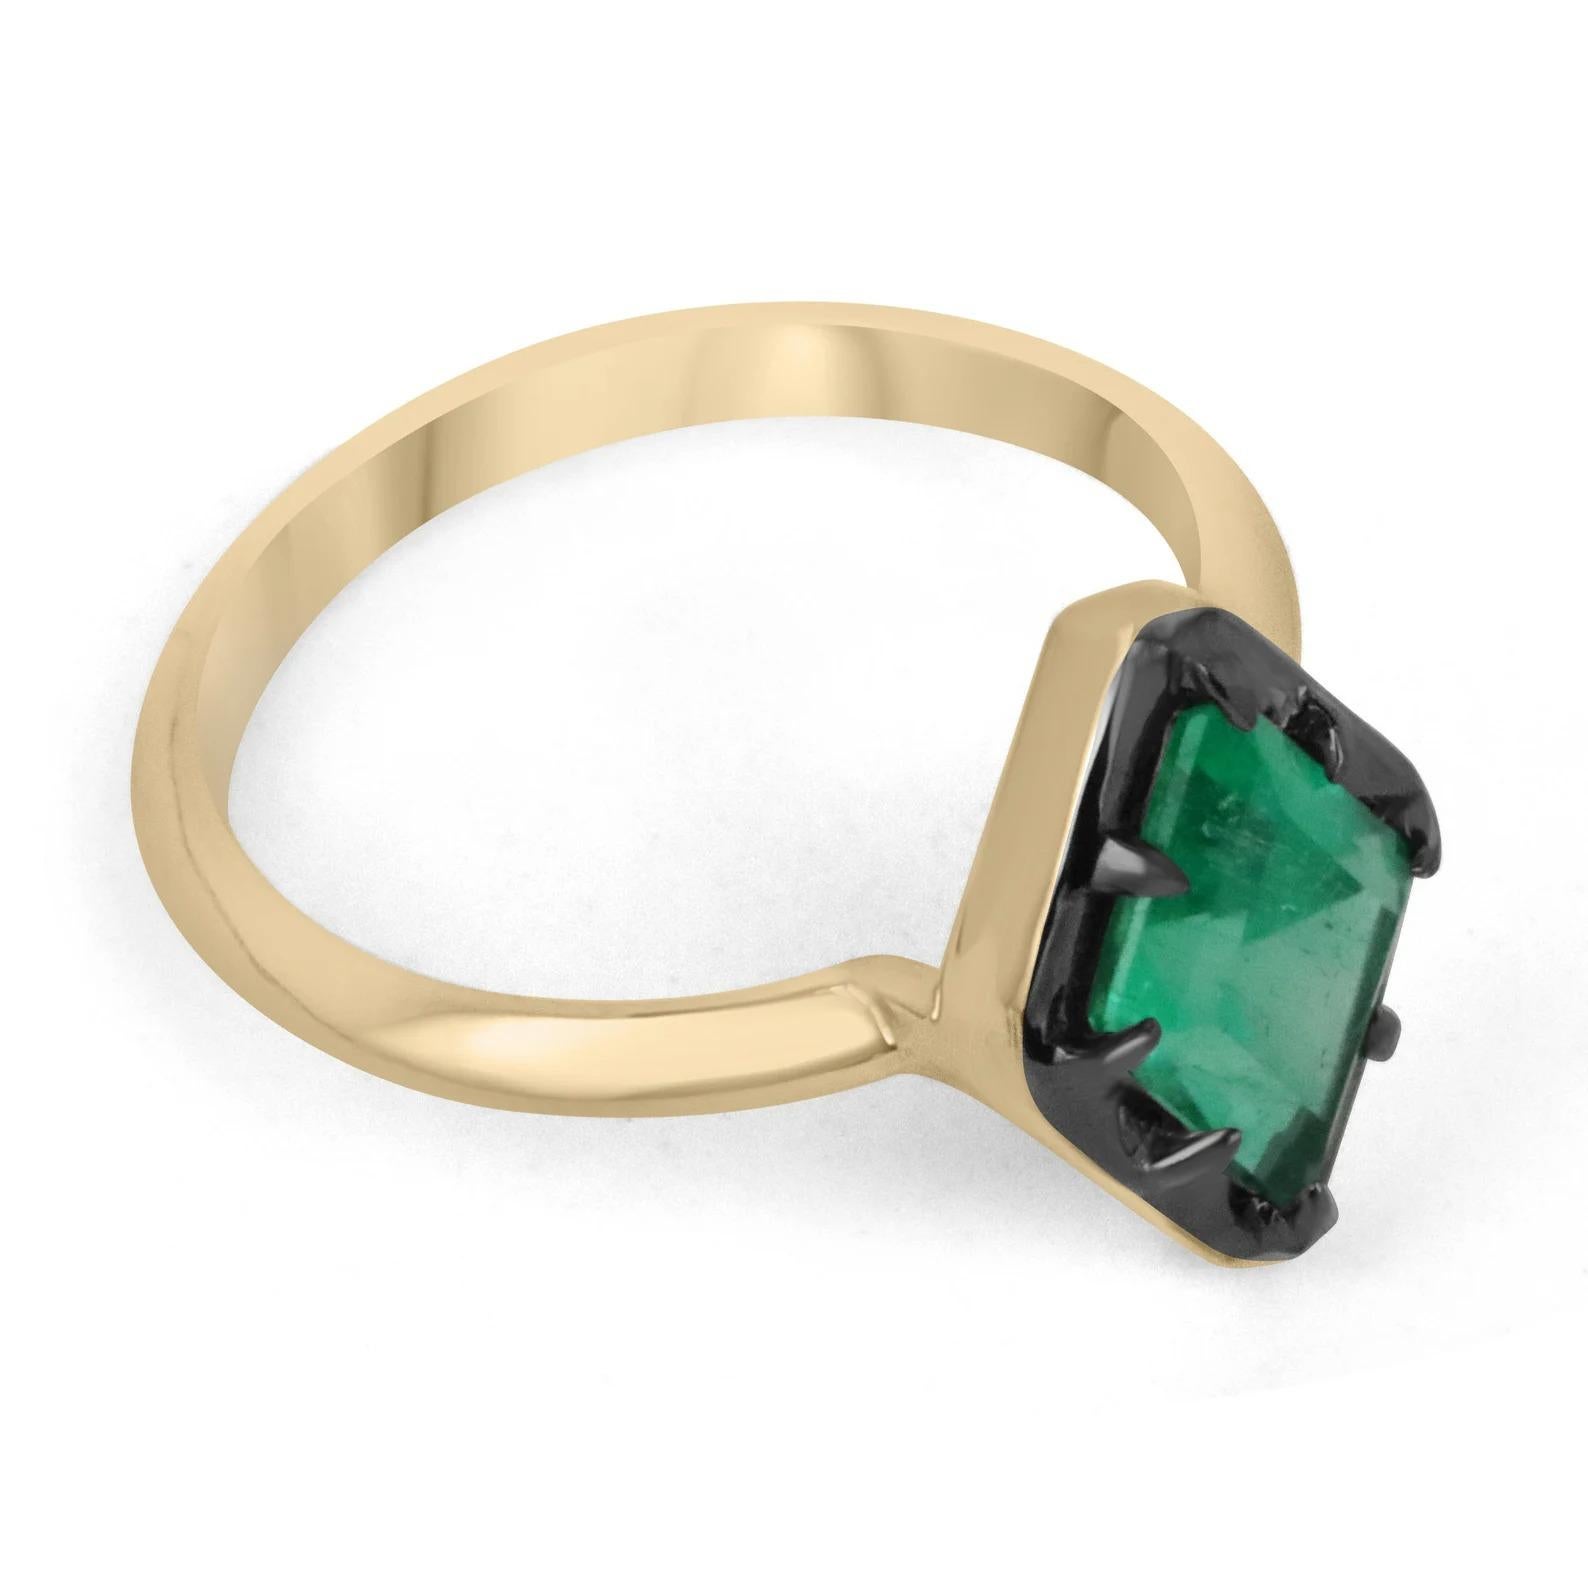 Displayed is a one-of-a-kind natural emerald, lozenge-cut solitaire gold ring. This fancy shape is extremely unique, as having emeralds cut in these rare shapes is very uncommon. This natural emerald showcases a vivacious electric medium green color